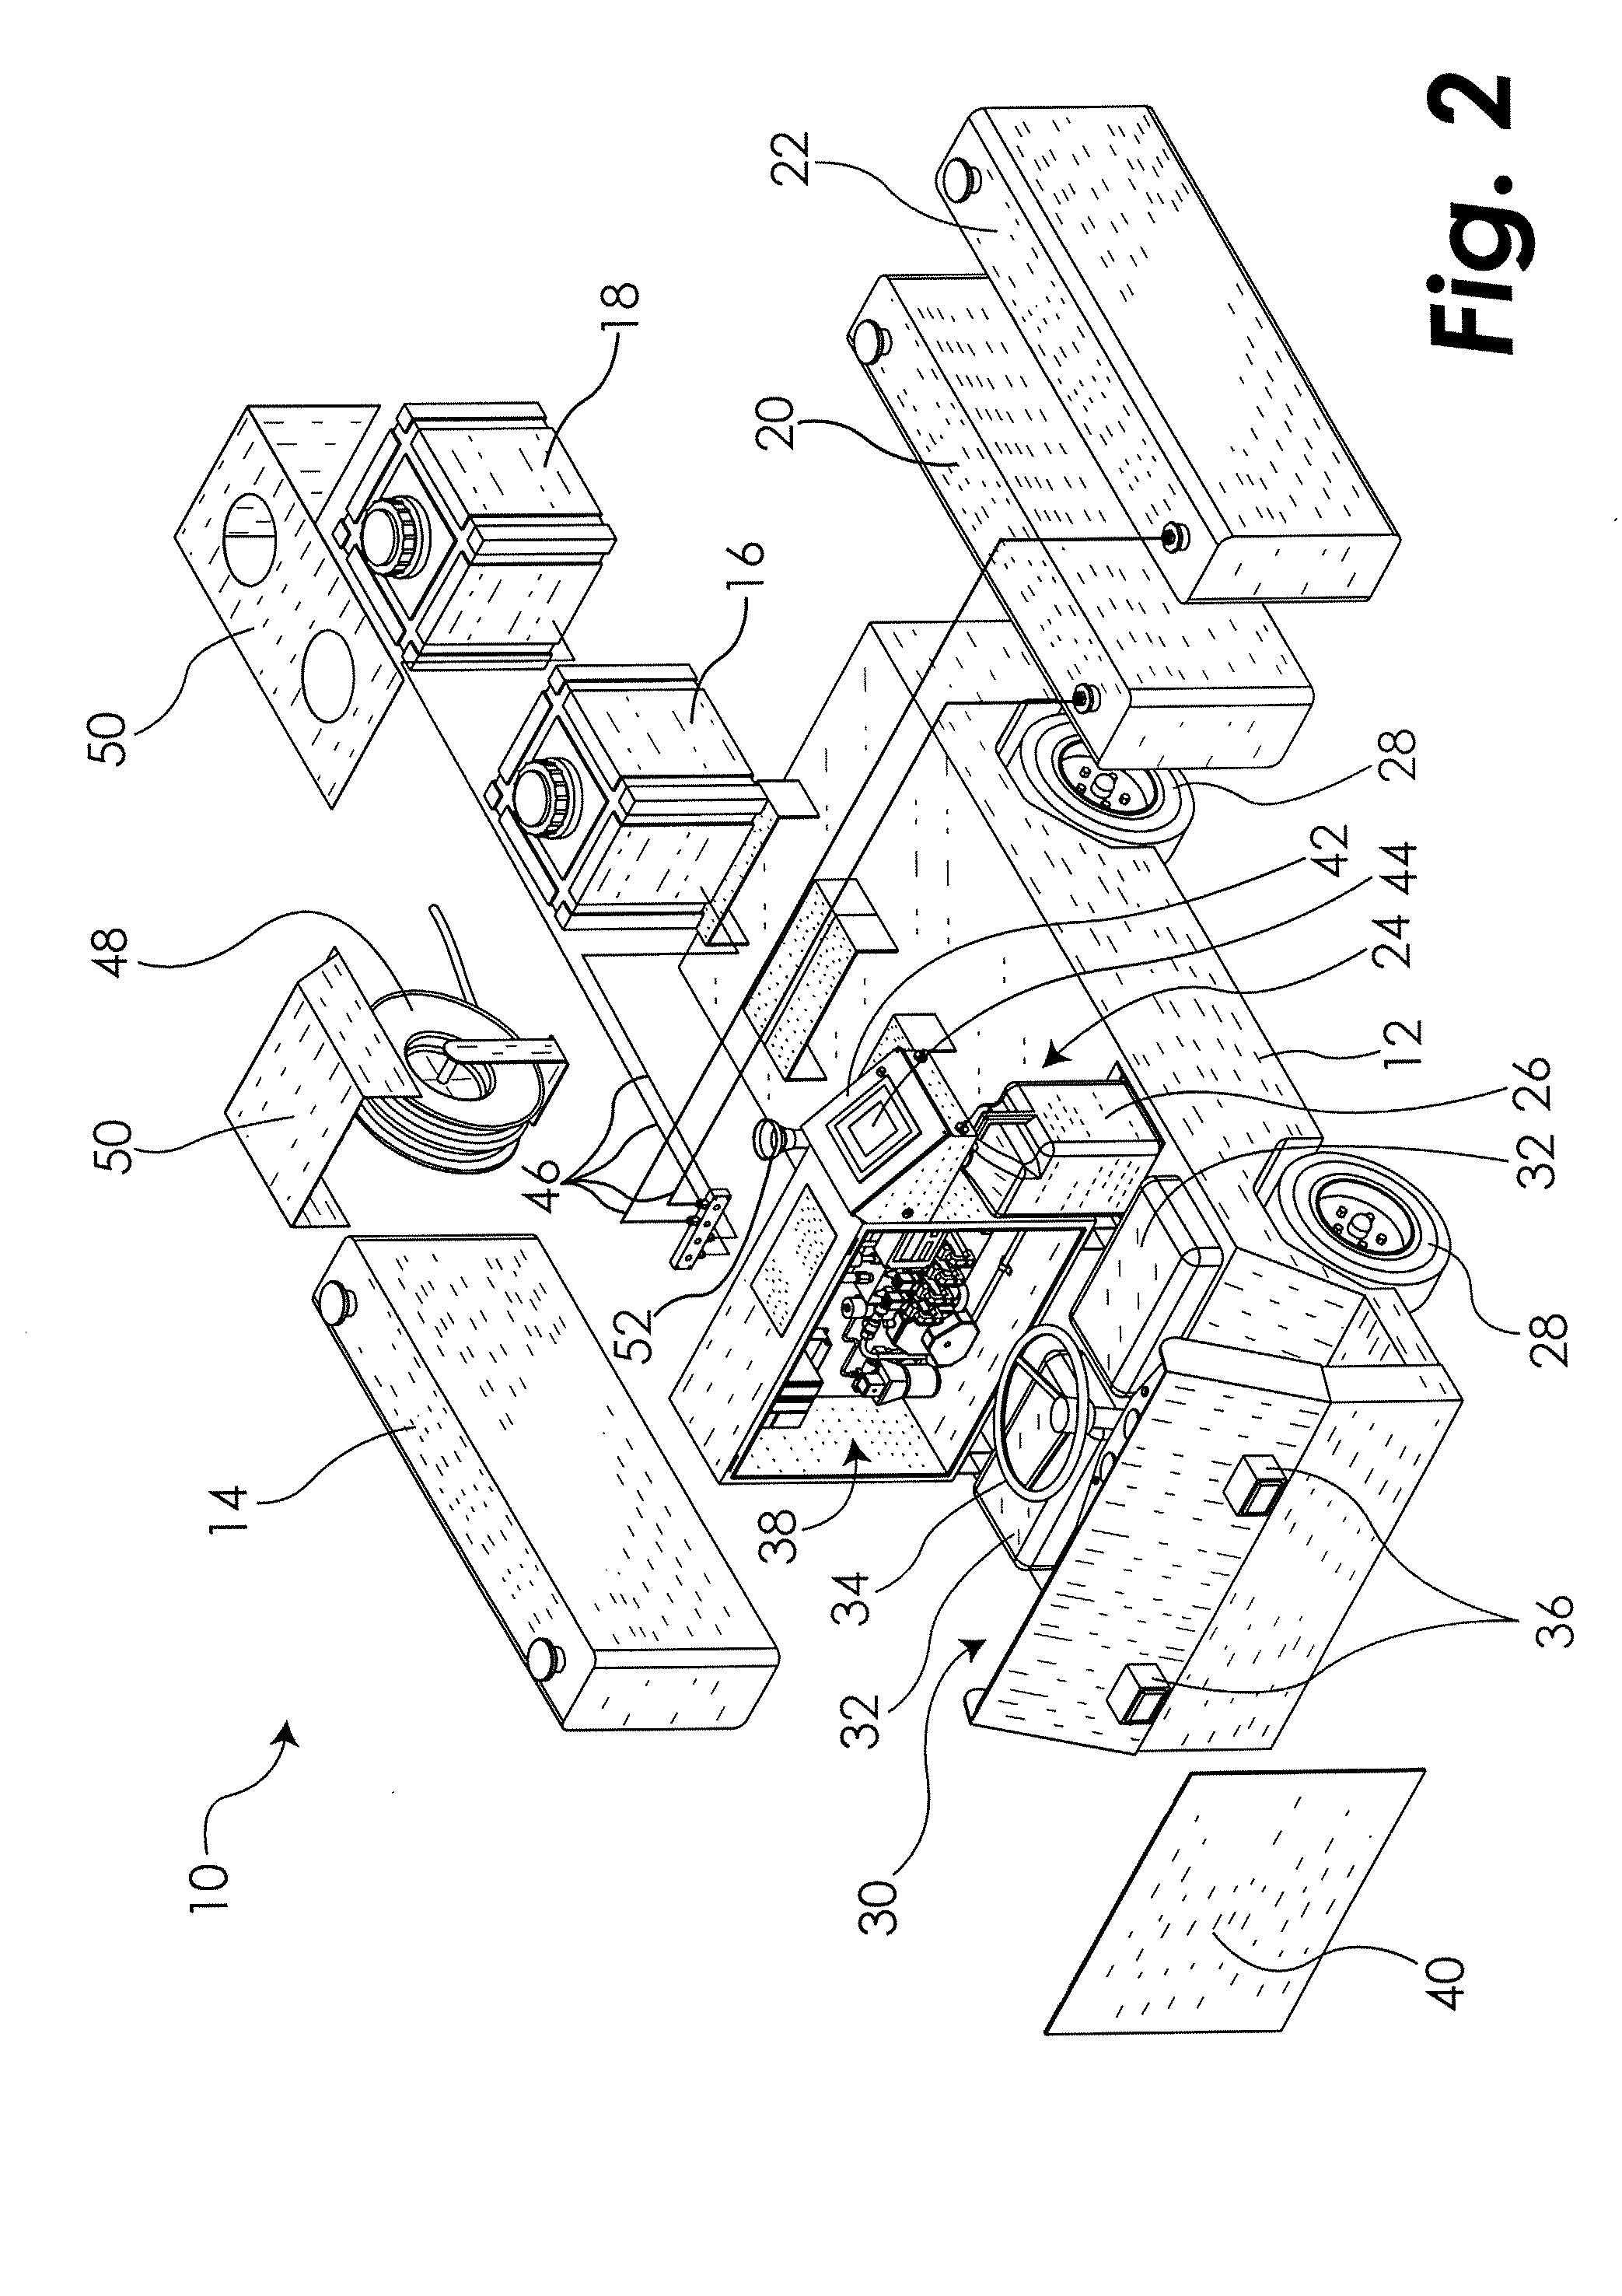 Apparatus and method for sampling and correcting fluids